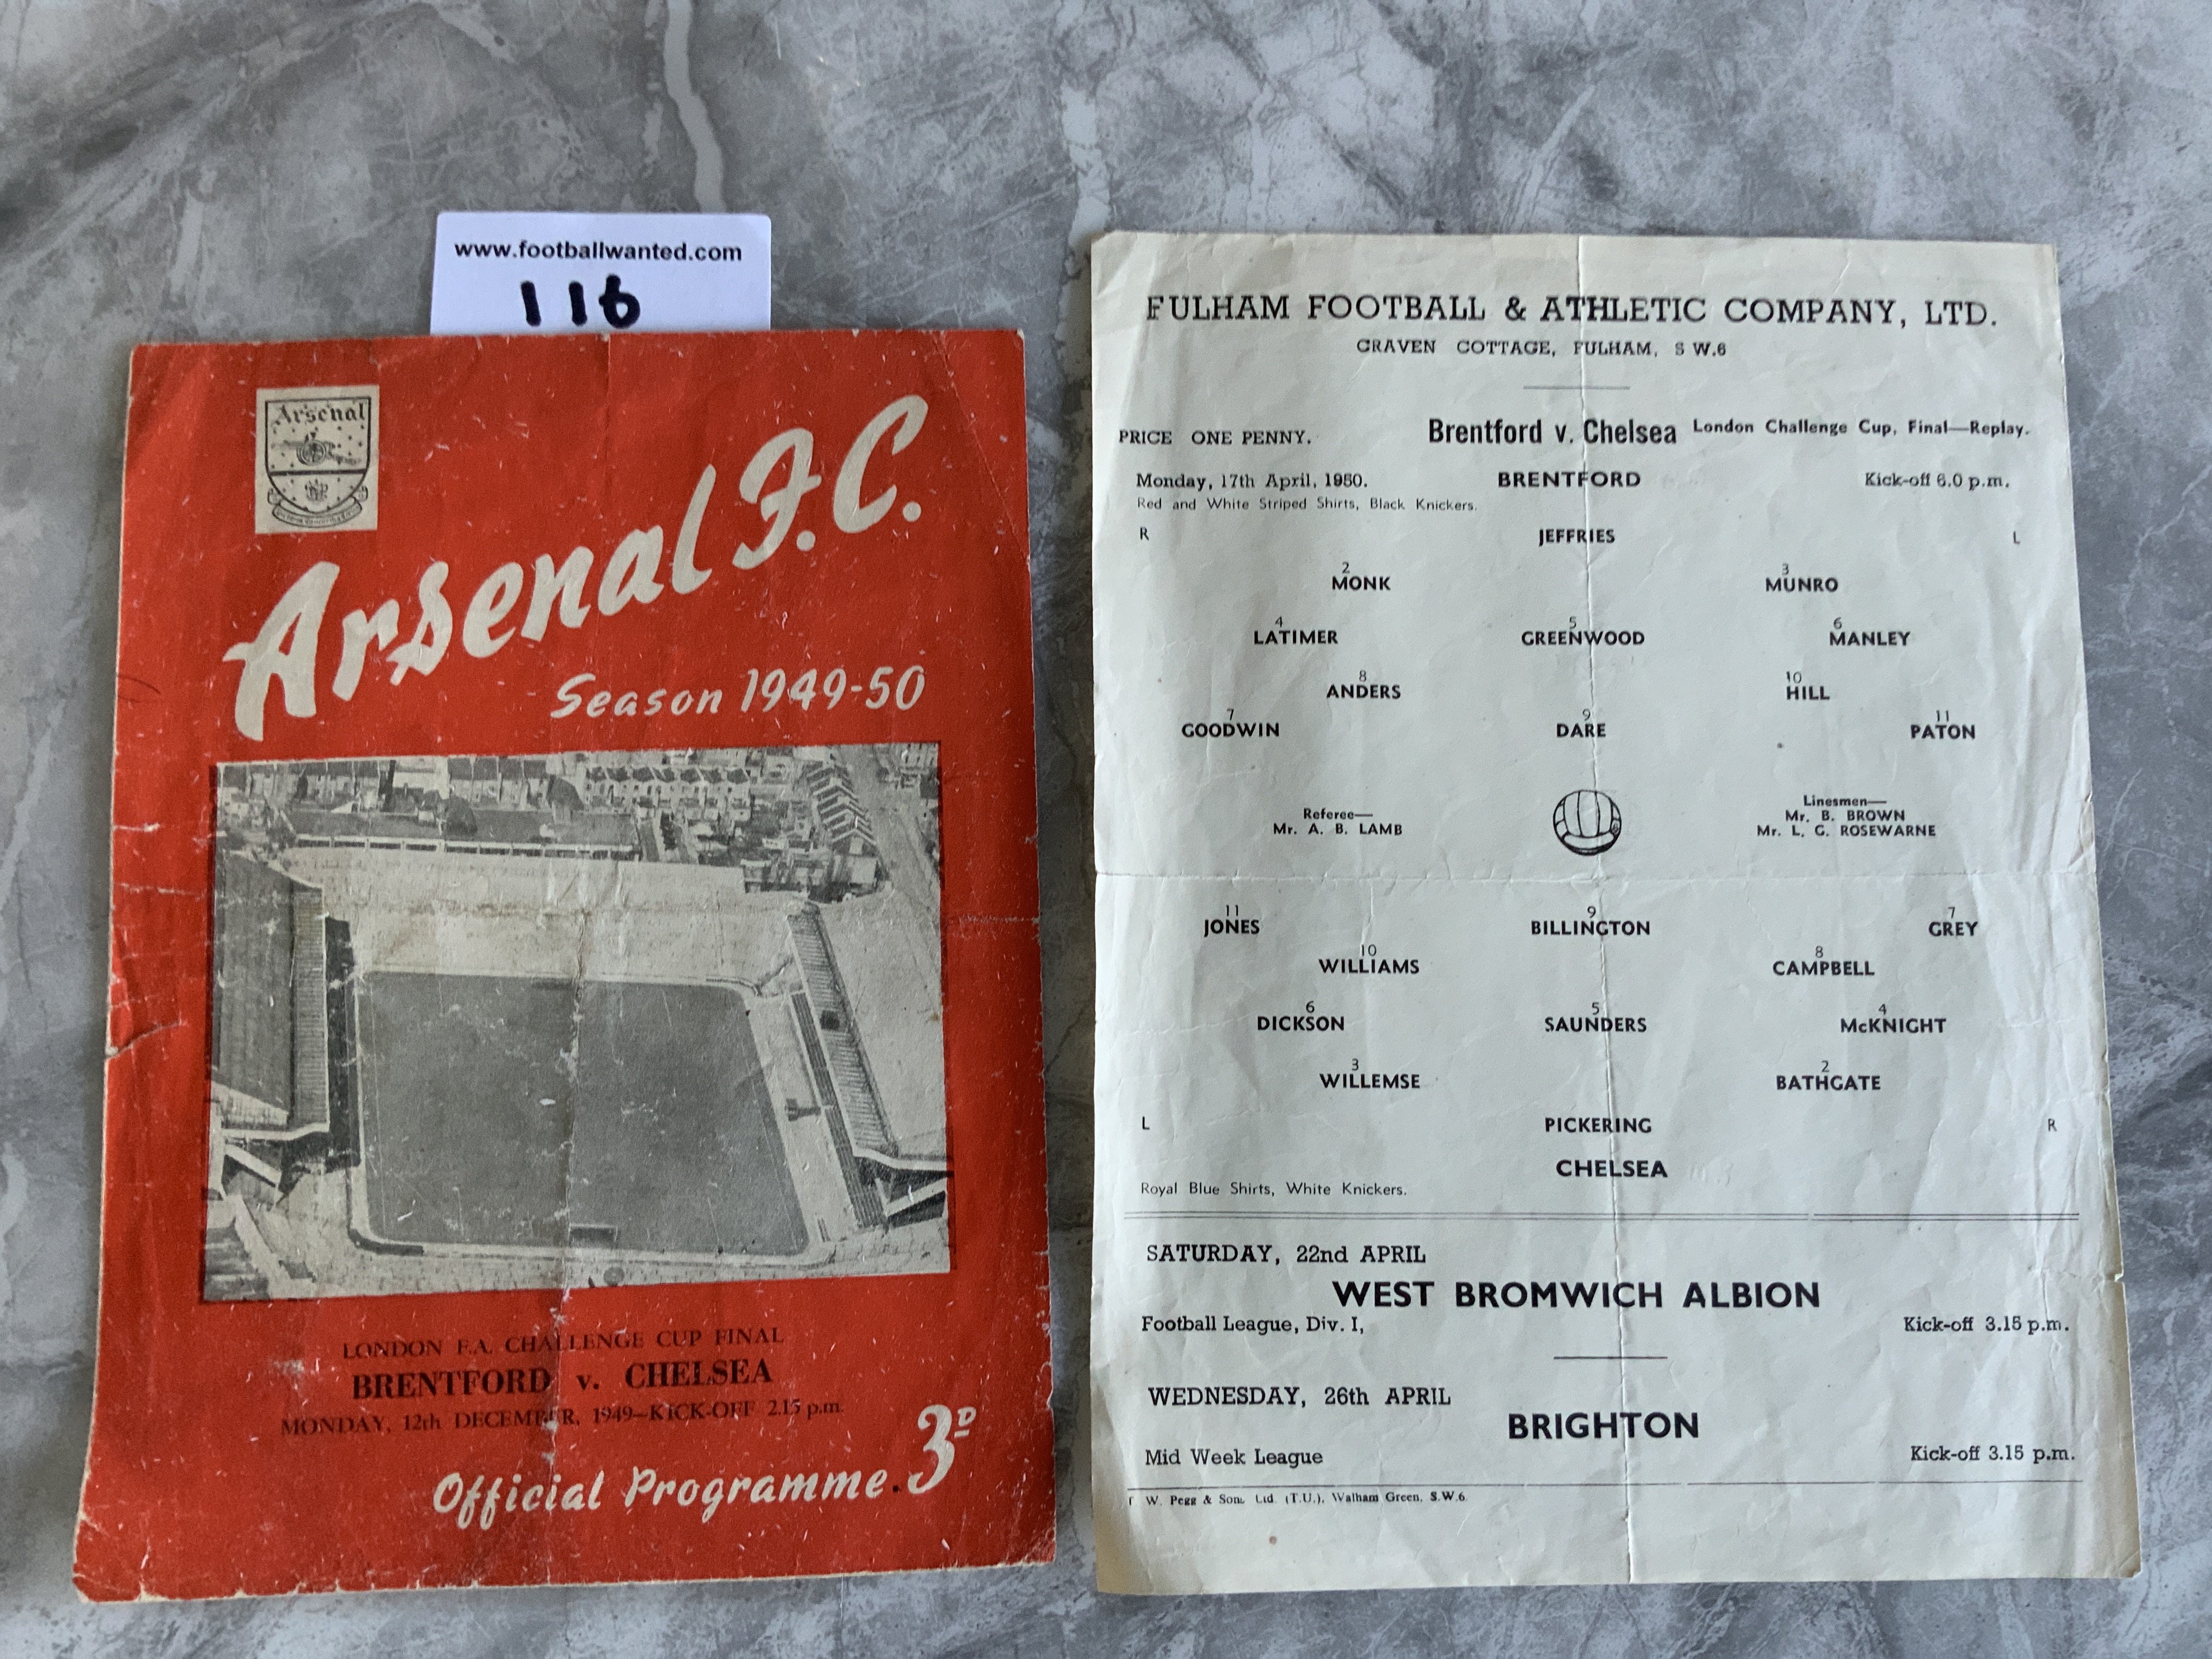 1950 London Challenge Cup Final + Replay Football Programmes: Brentford v Chelsea played at